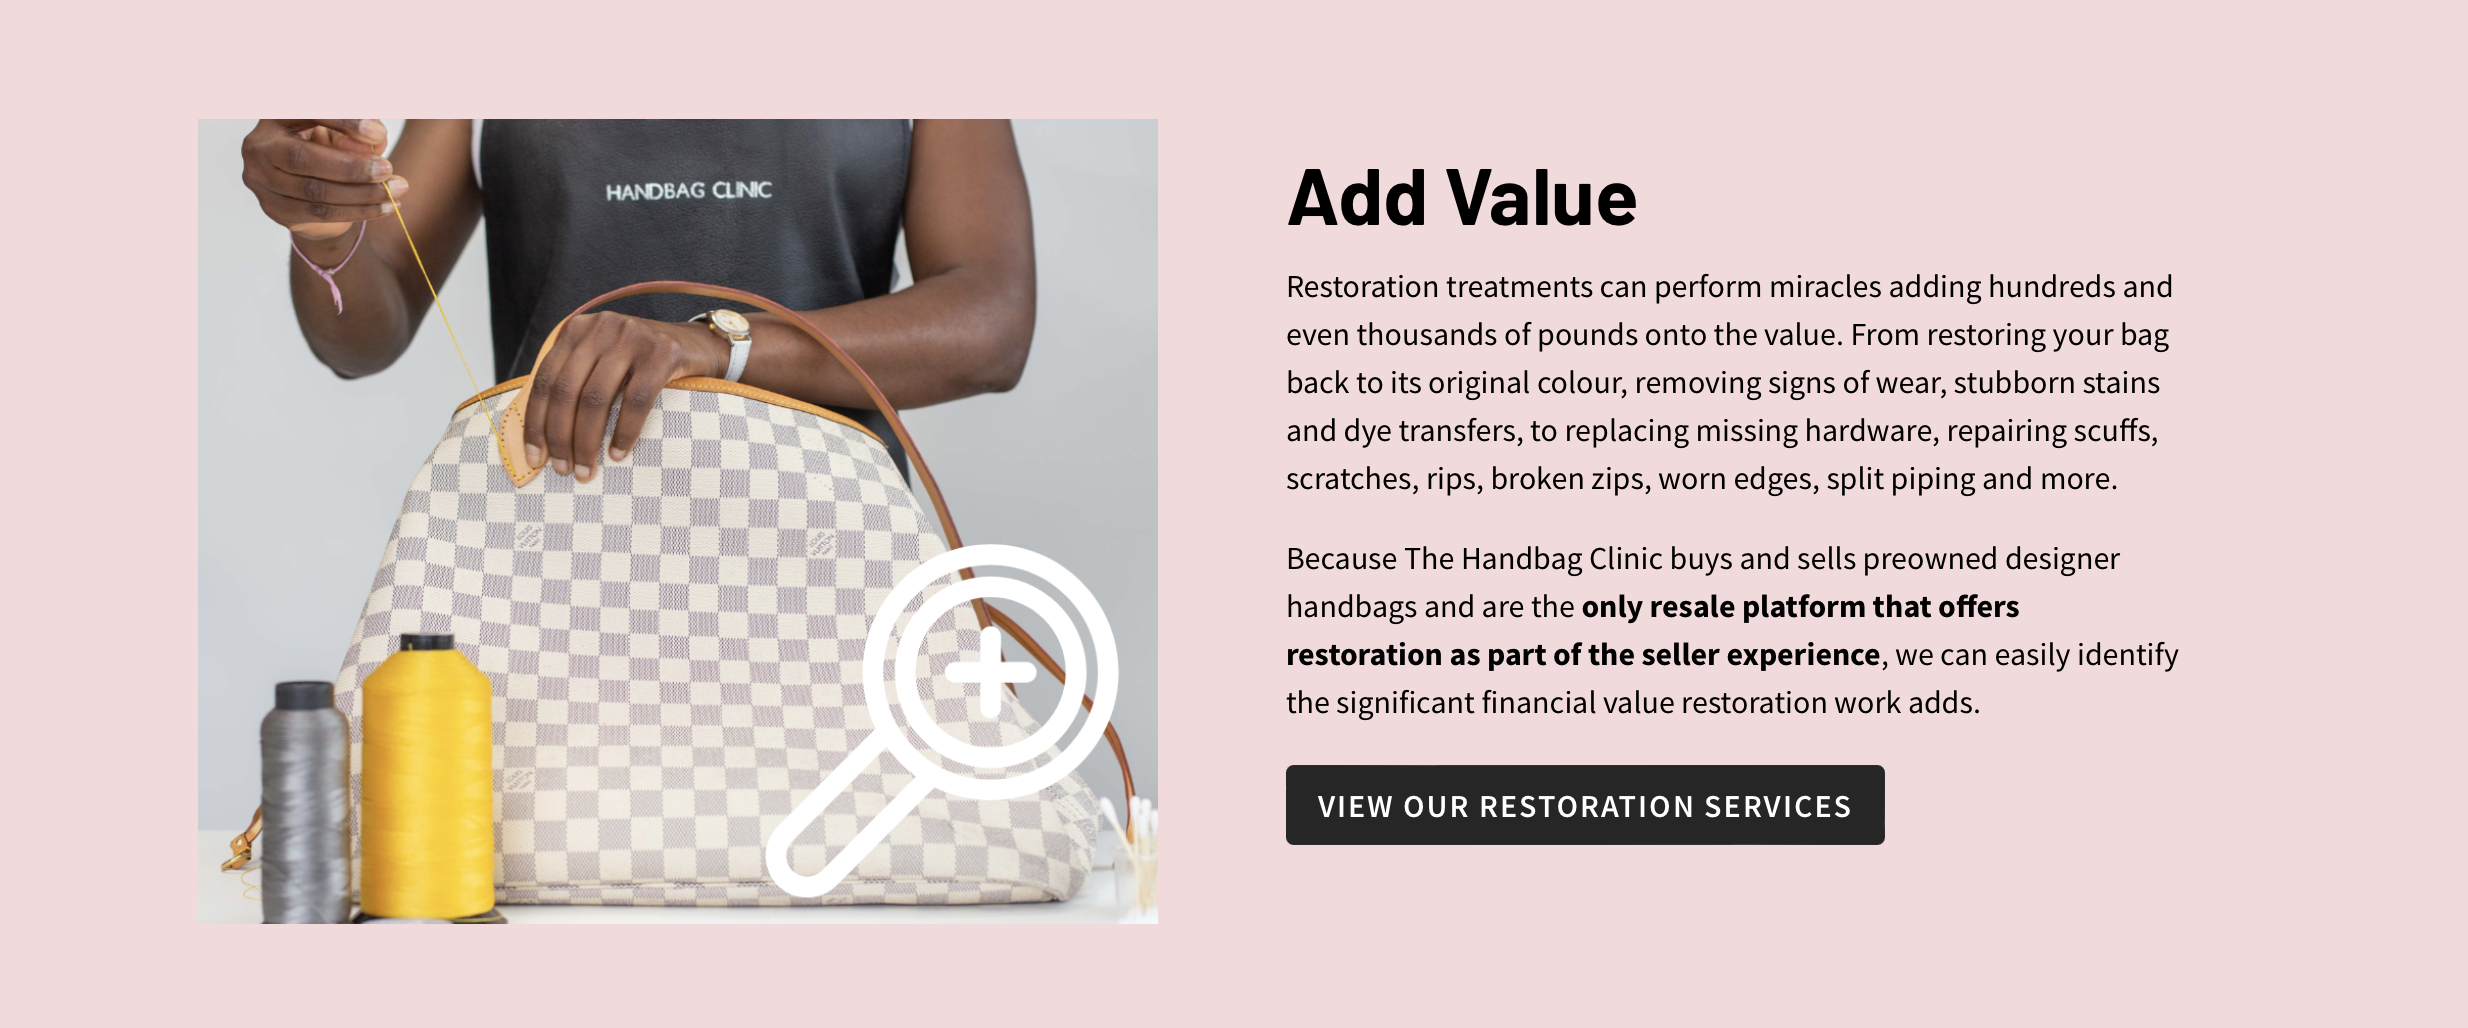 Restore your investment bags at The Handbag Clinic to help retain their value